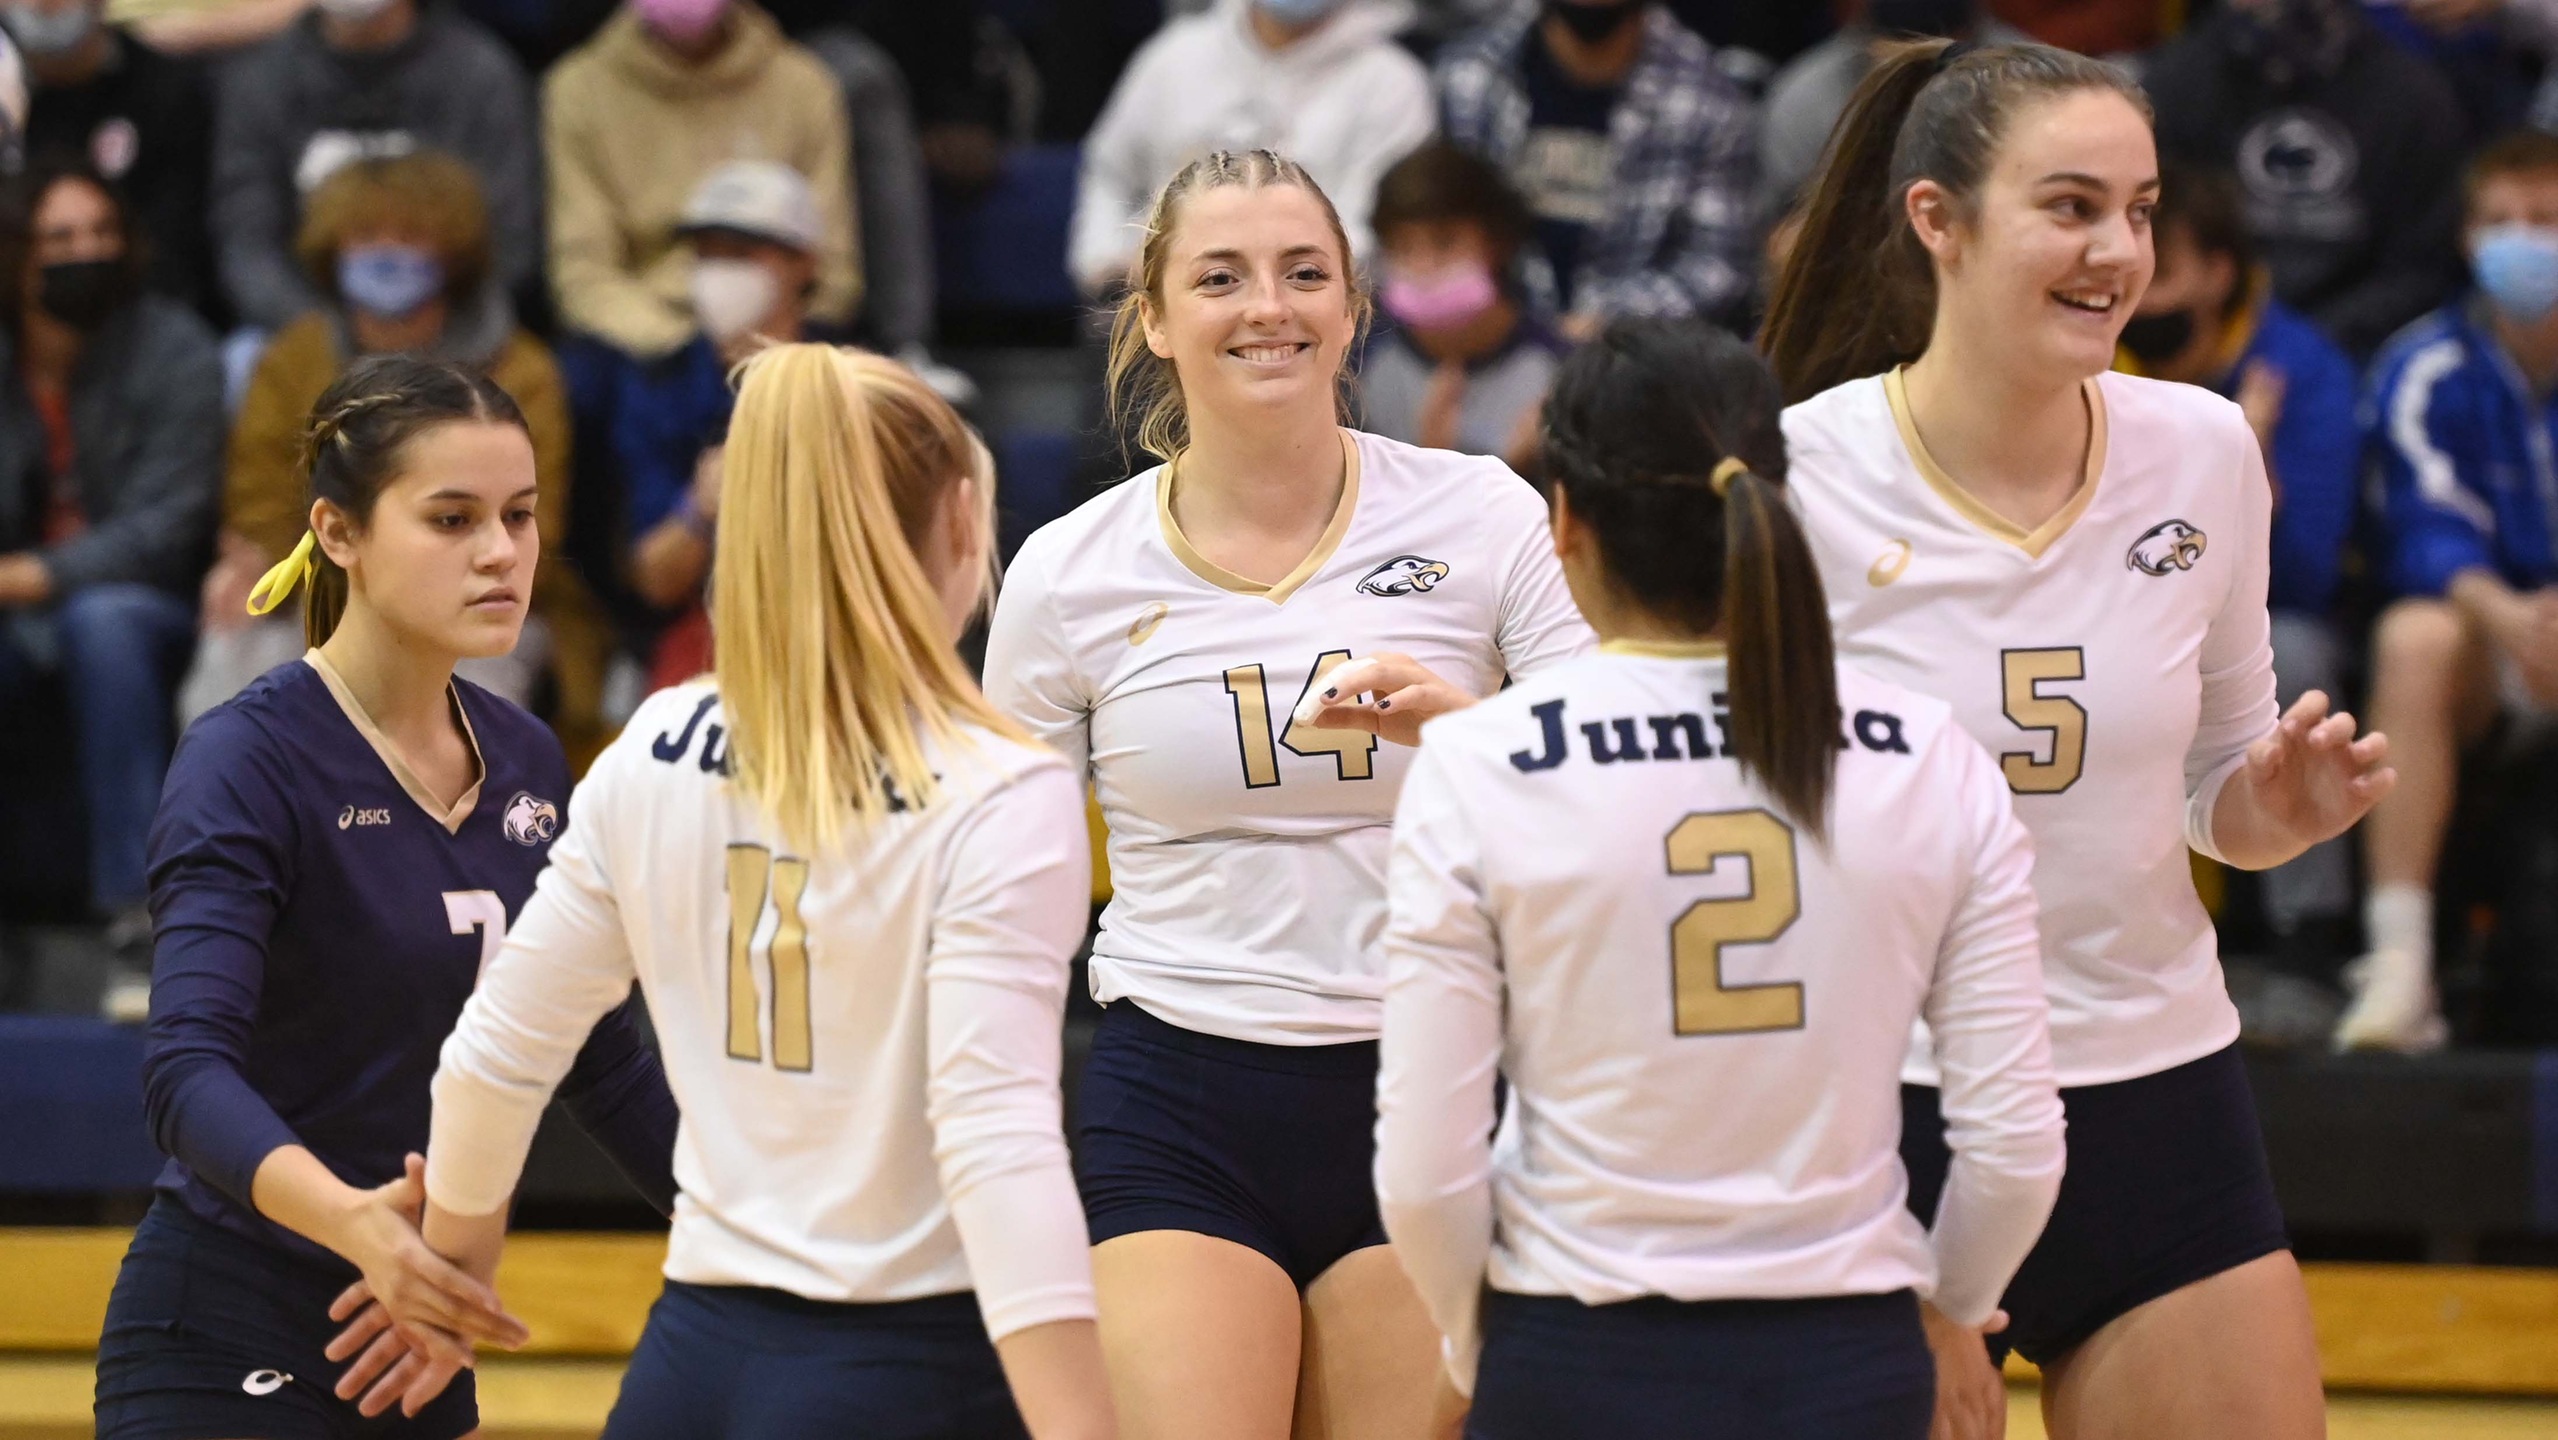 Women's Volleyball to Take on Gallaudet this Friday at 3:00 at RIT